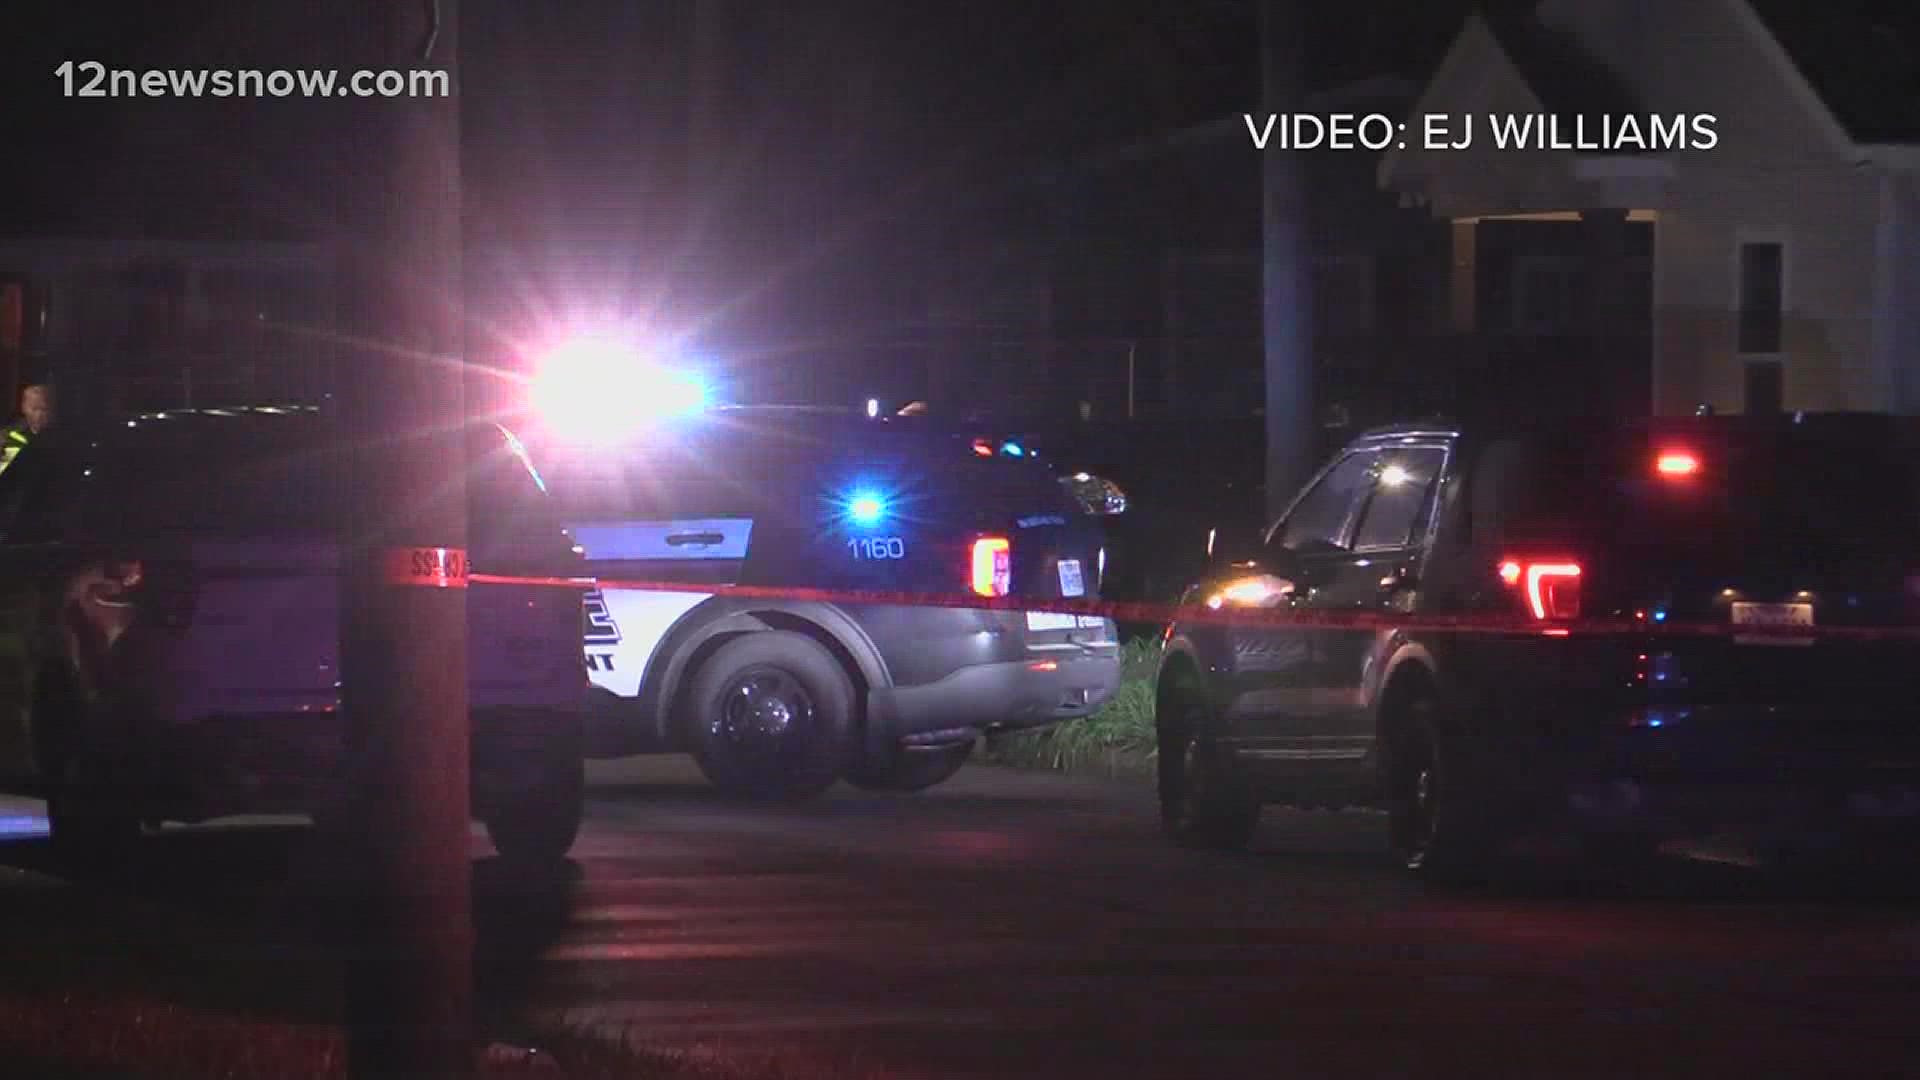 Police in Beaumont are investigating a Monday night shooting that left one person dead on the south side of the city.